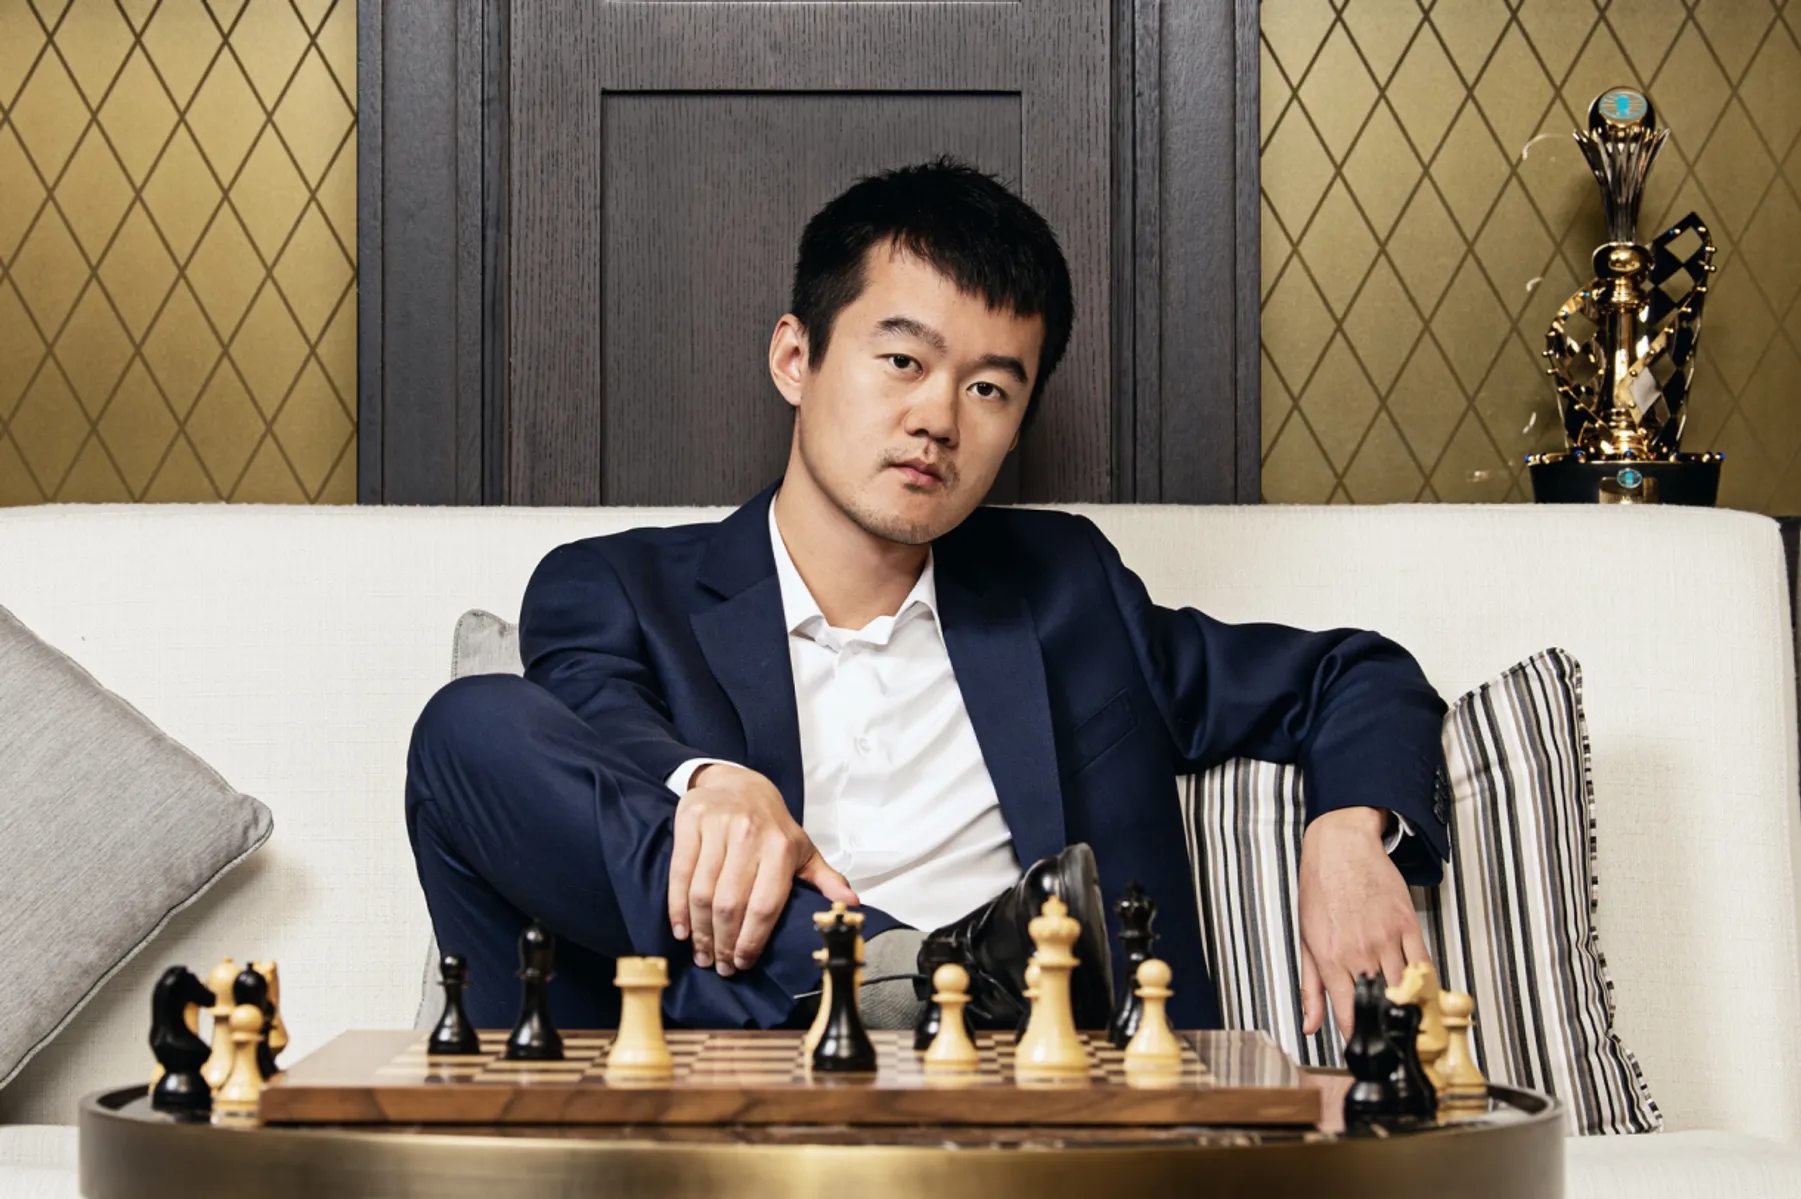 KING DING - Story of first Chinese World Chess Champion